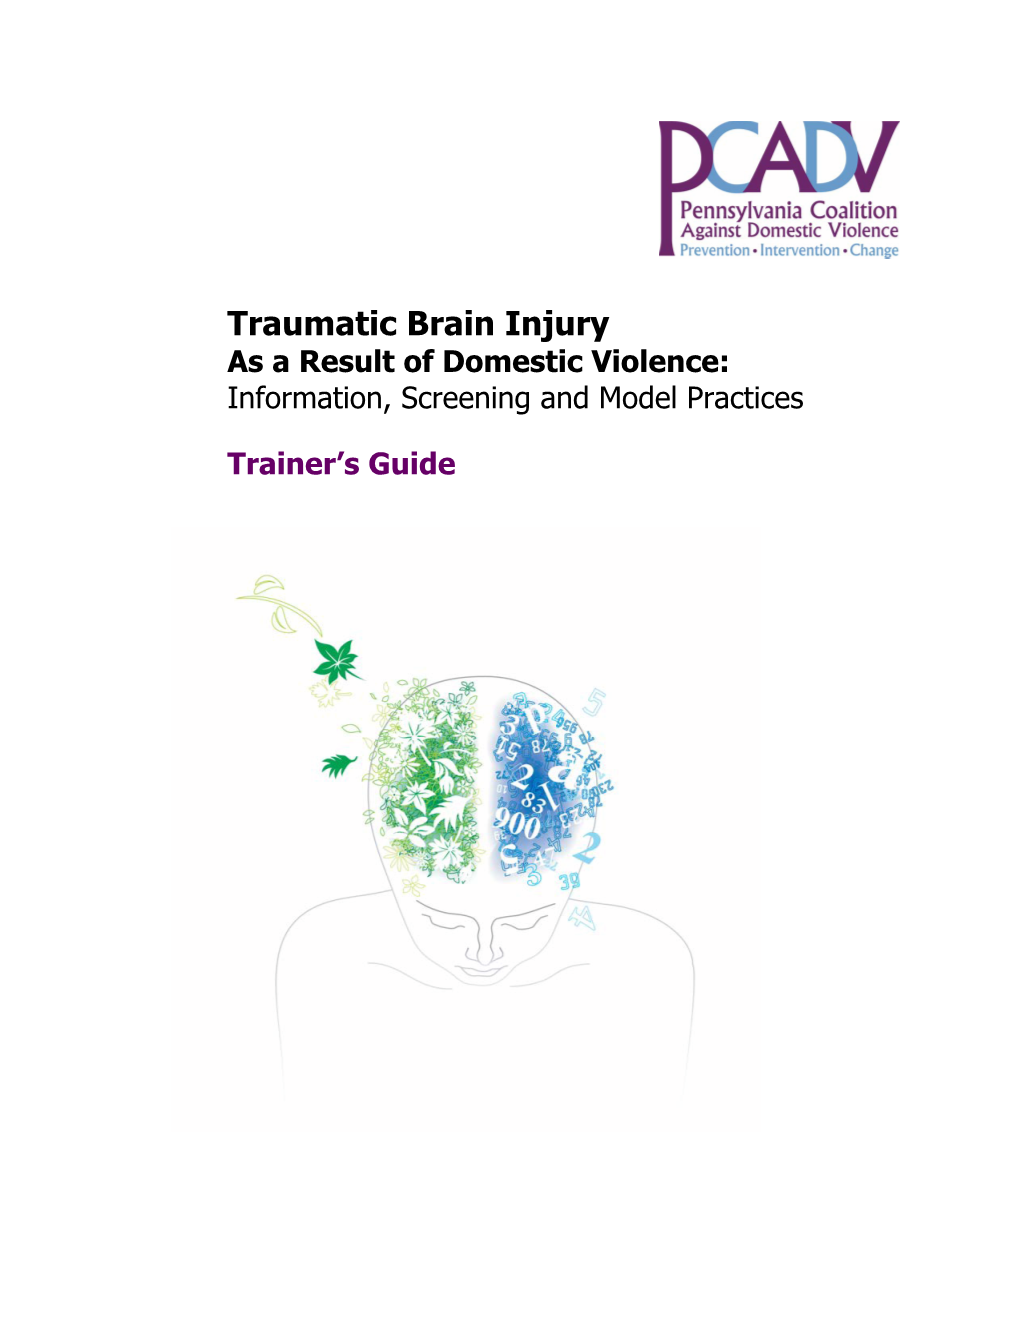 Traumatic Brain Injury As a Result of Domestic Violence: Information, Screening and Model Practices